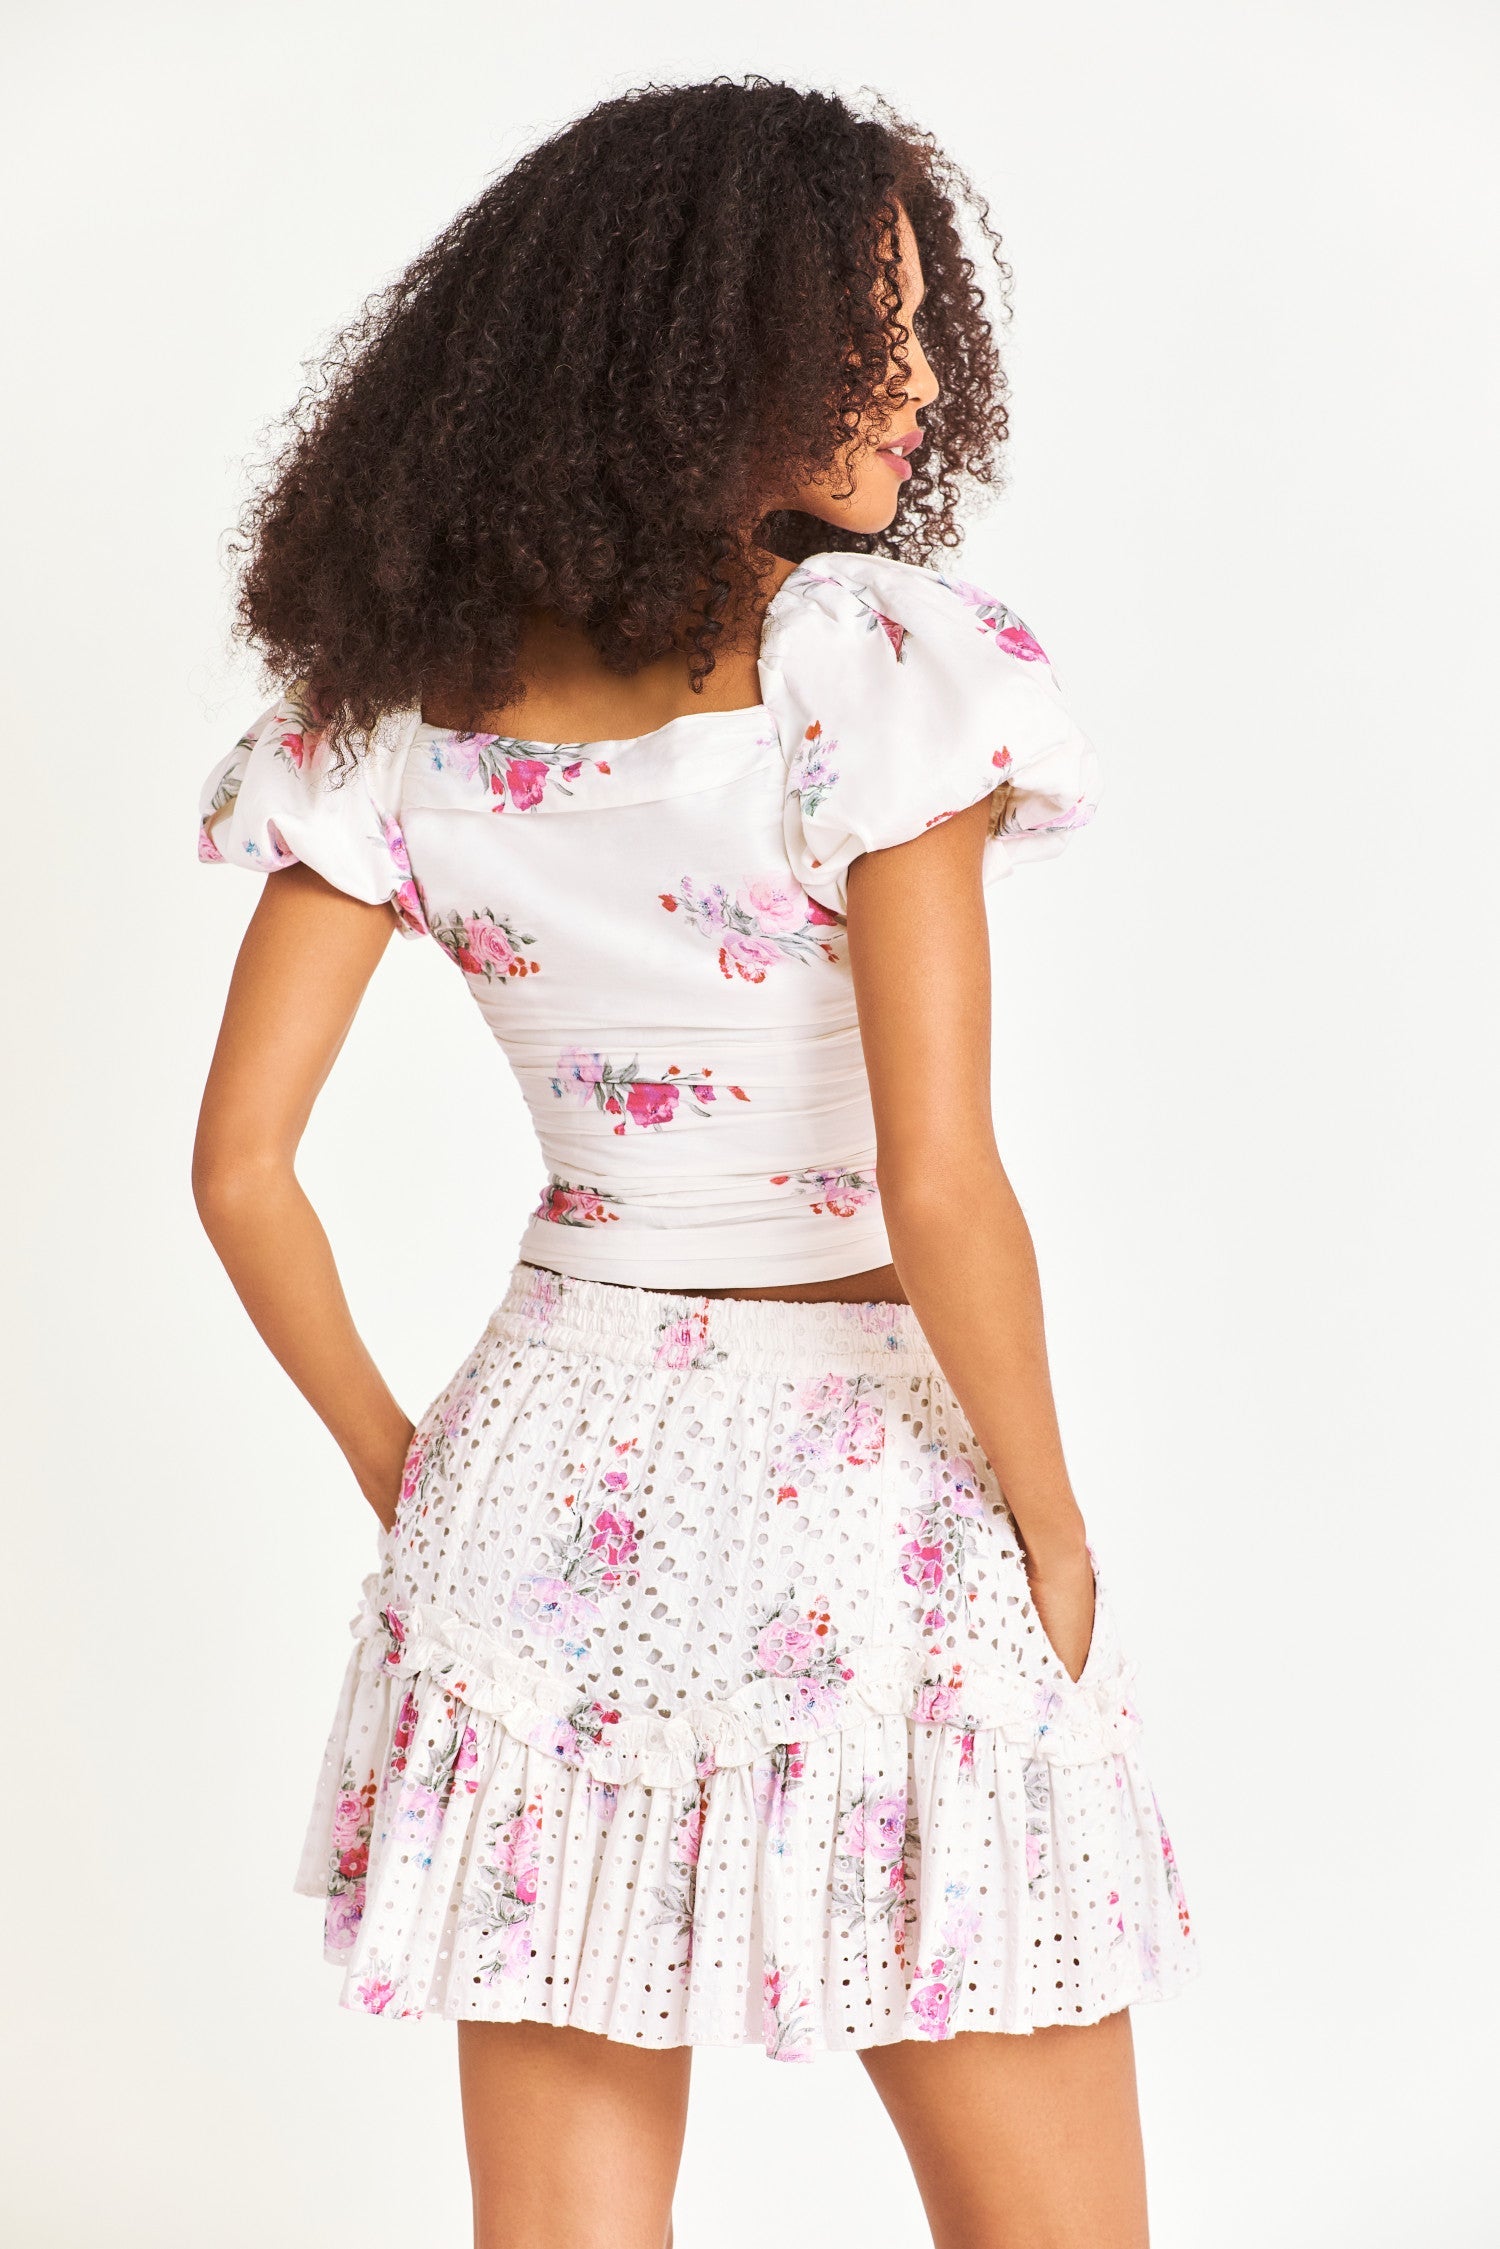 White floral skirt with printed eyelet cotton